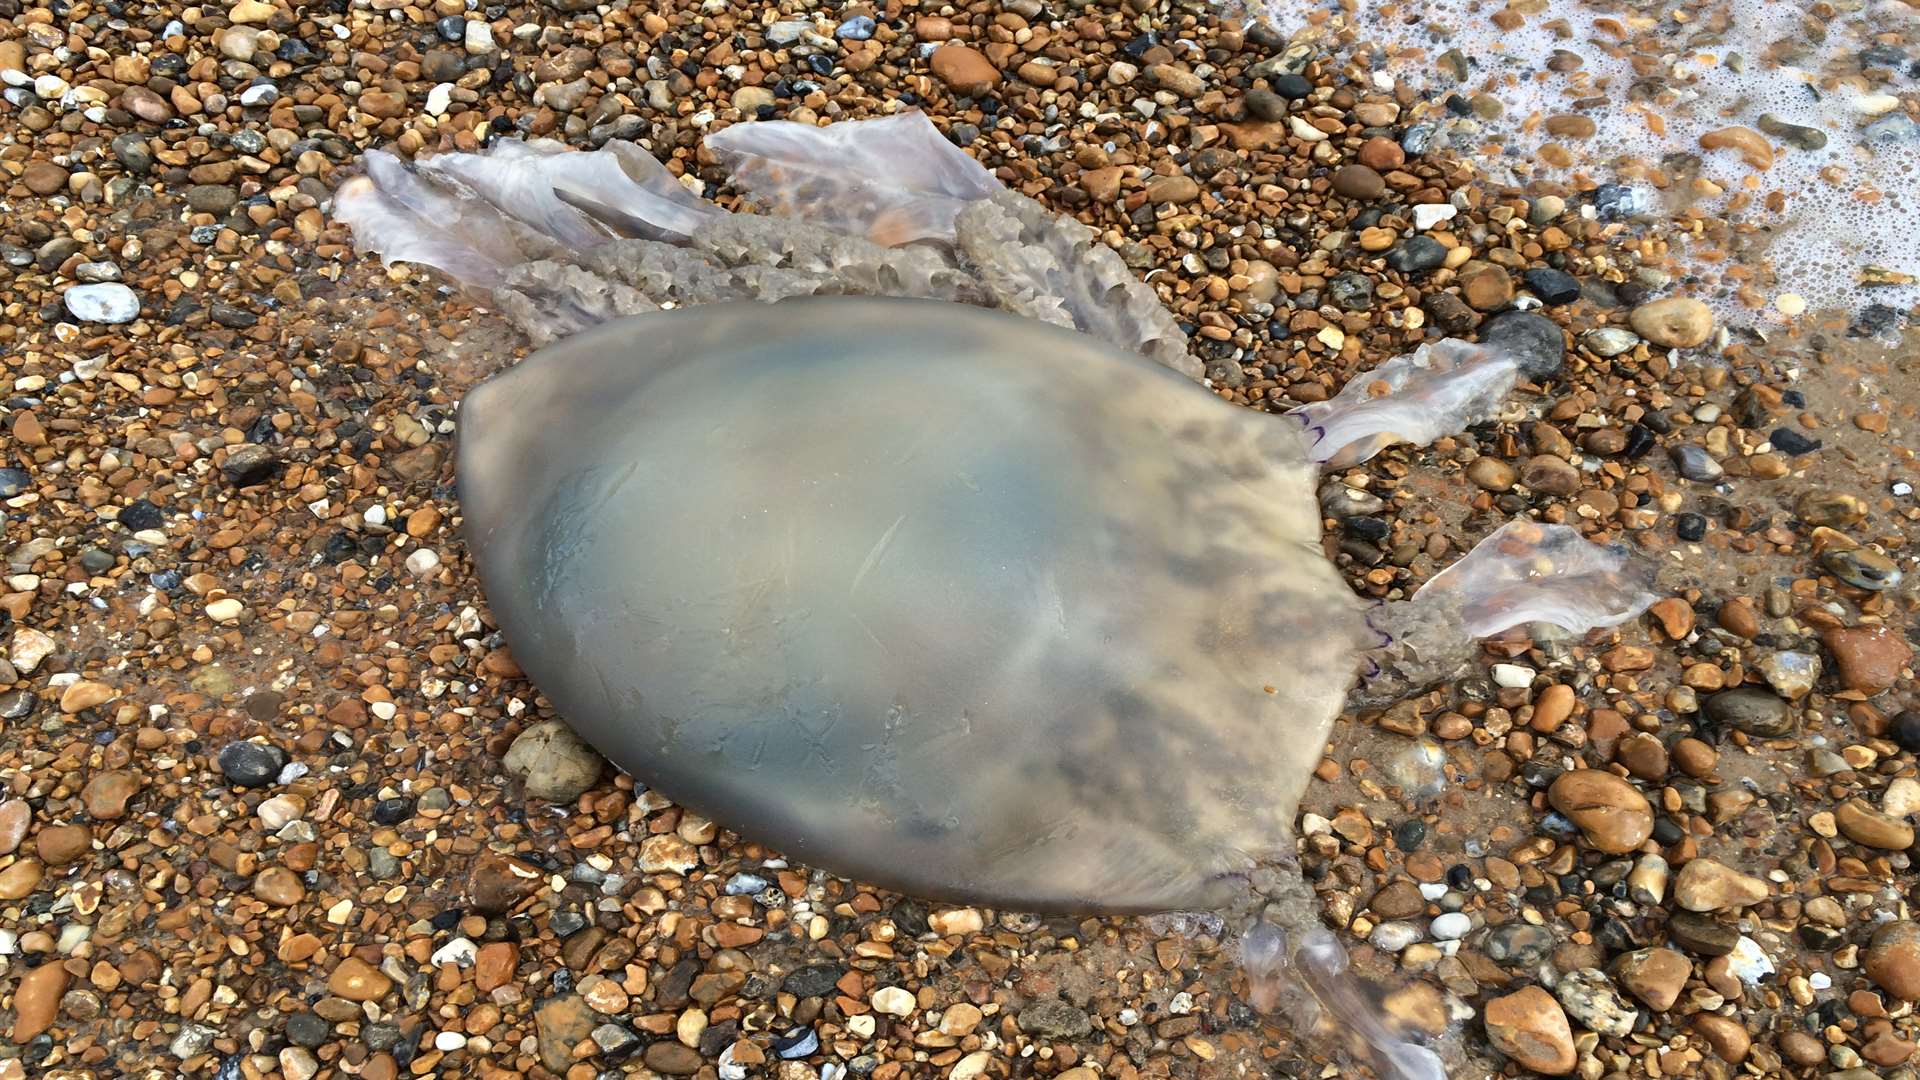 The surprising find of a dead jellyfish on a Kent beach. Picture: Josh Clarke